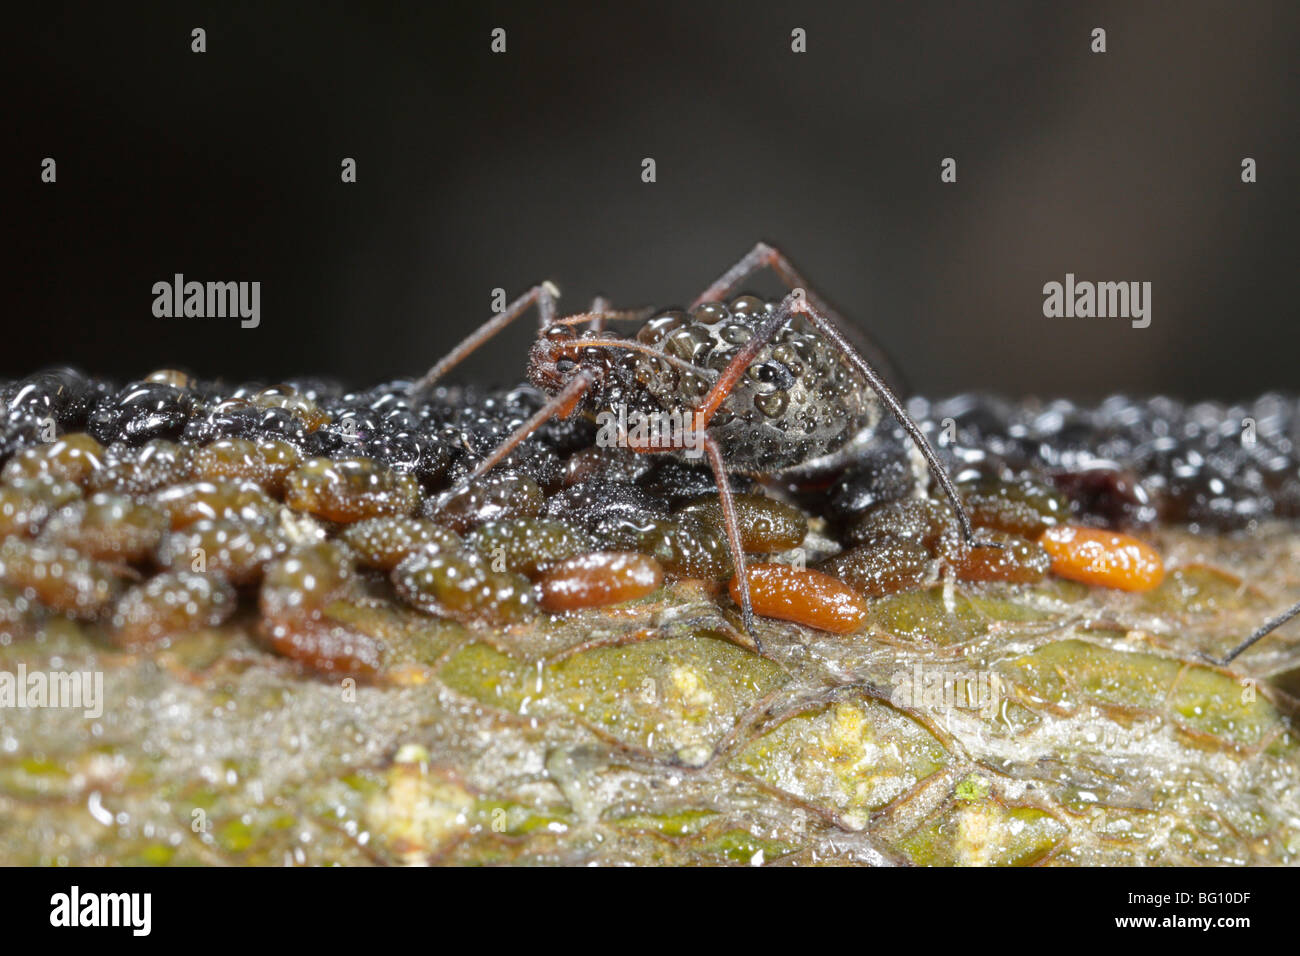 Aphids (Lachnus roboris) on an oak. They have laid eggs and are being guarded and milked by ants (Lasius niger). Dew covers them Stock Photo